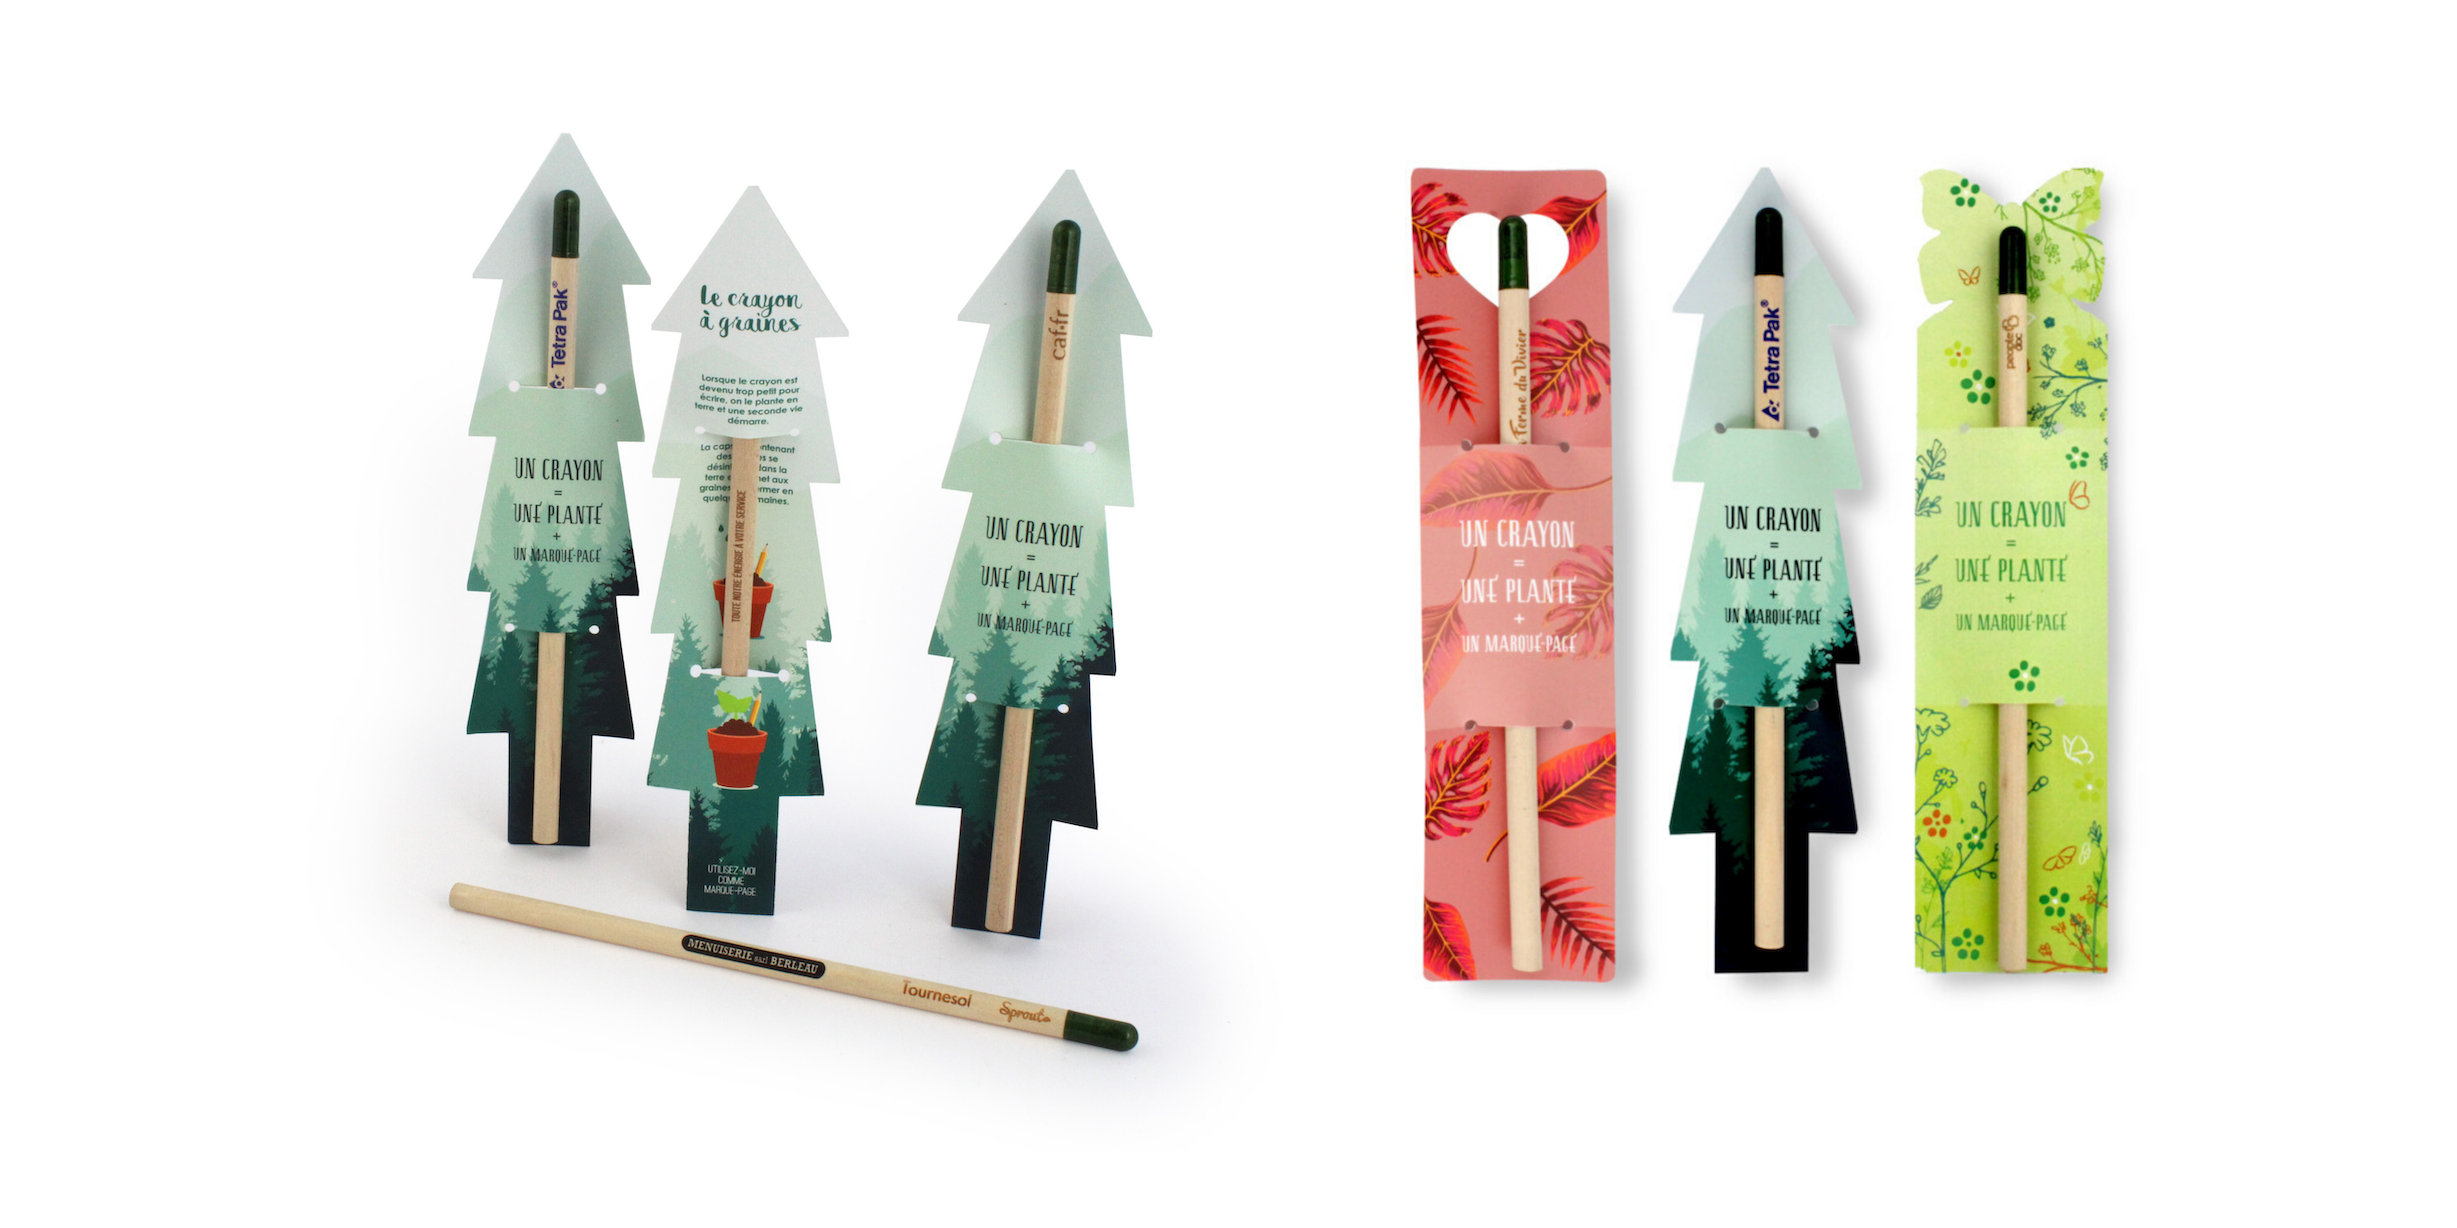 The seed pencil and its customizable bookmark in the shape of a fir tree